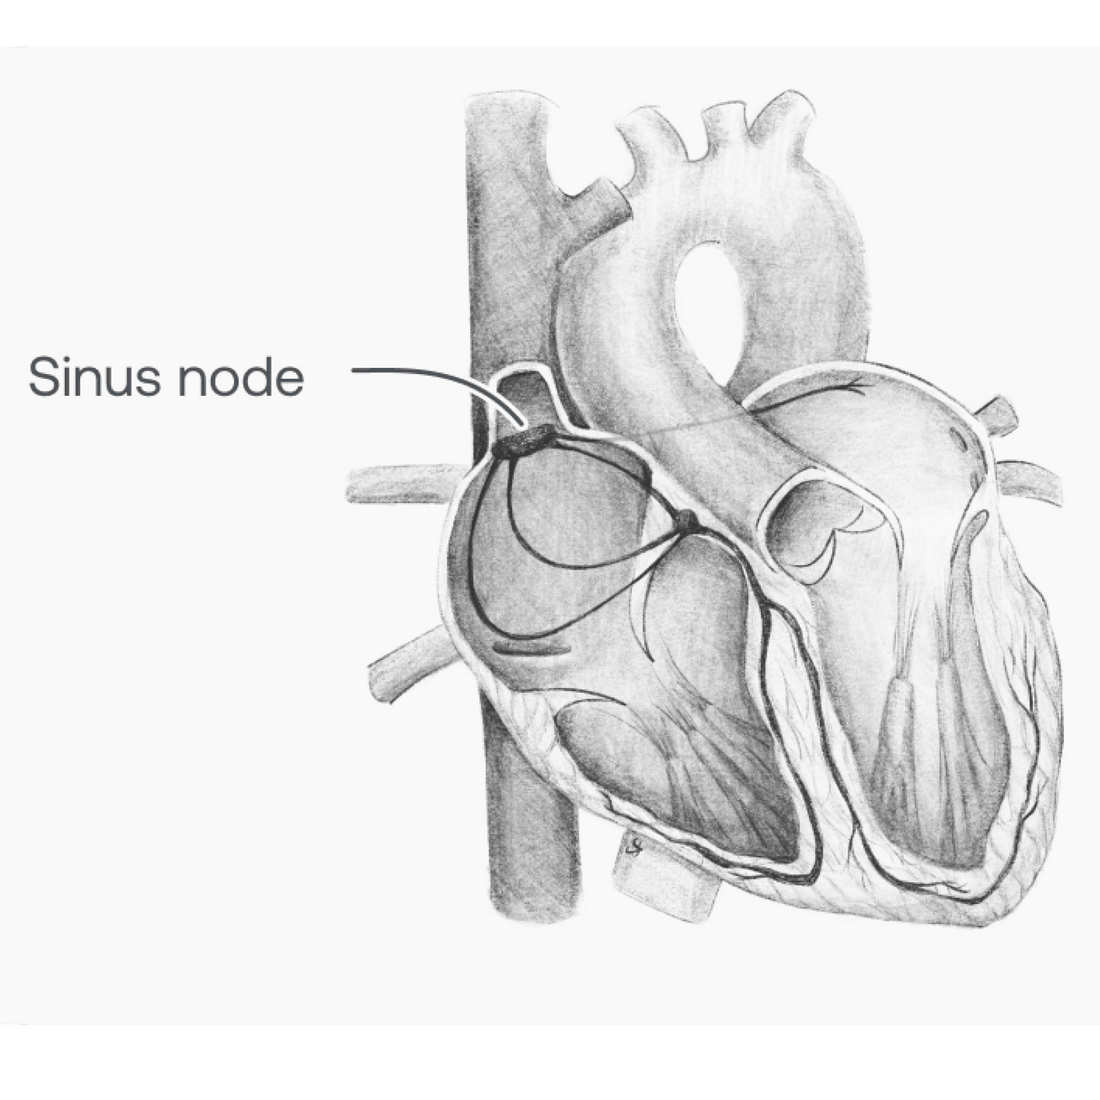 Ppencil drawing of the heart anatomy highlighting the sinus node